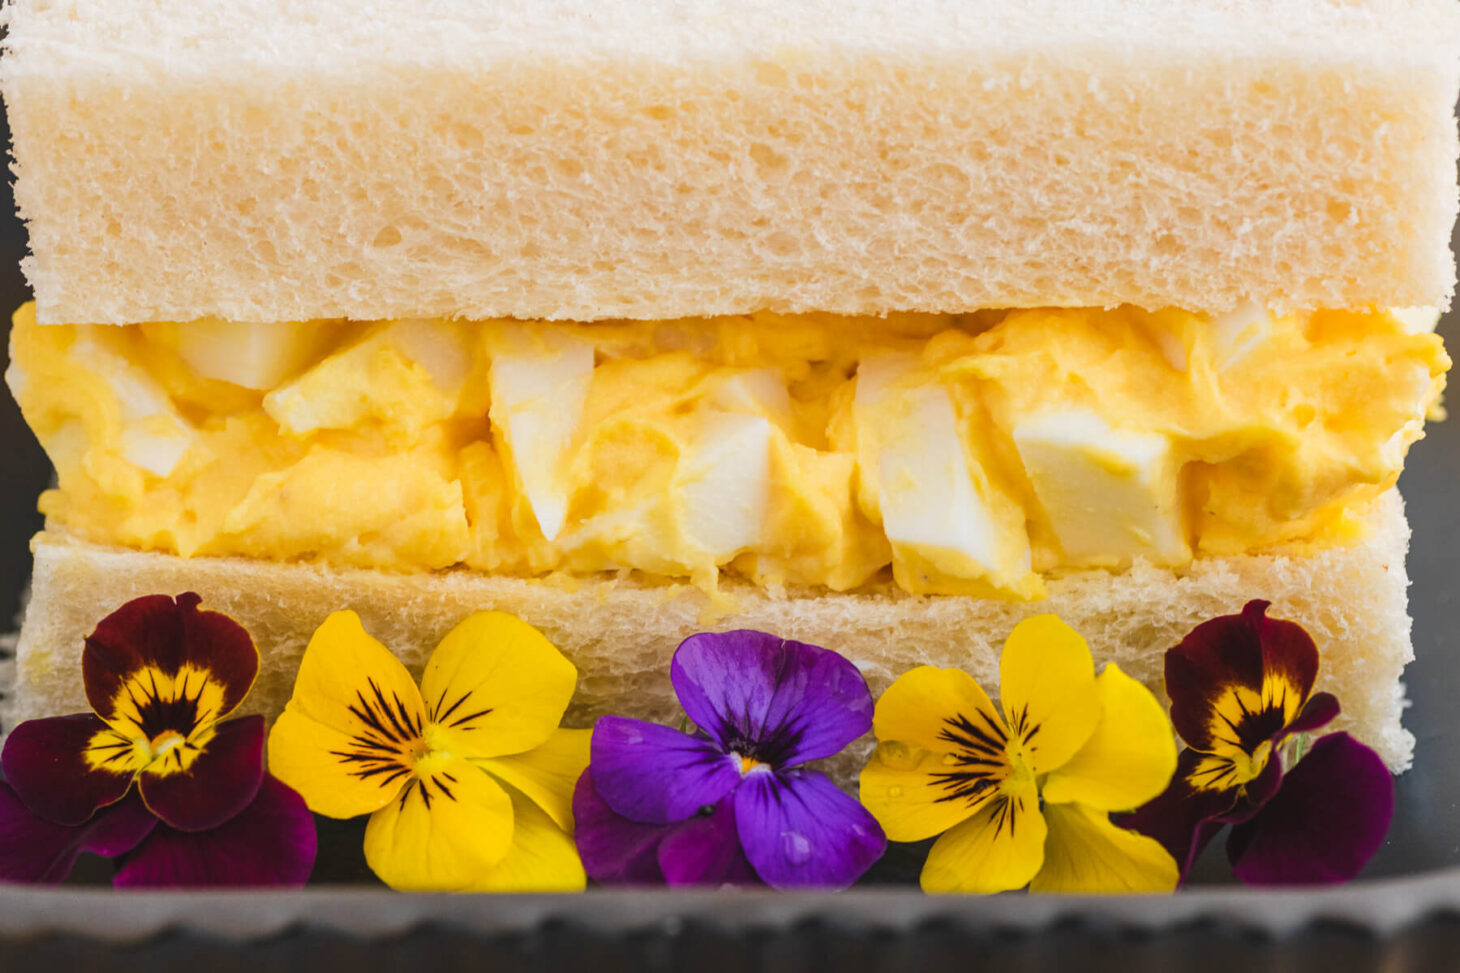 A rich yellow egg salad sandwich on fluffy white crust less bread on a plate garnished with edible flowers.